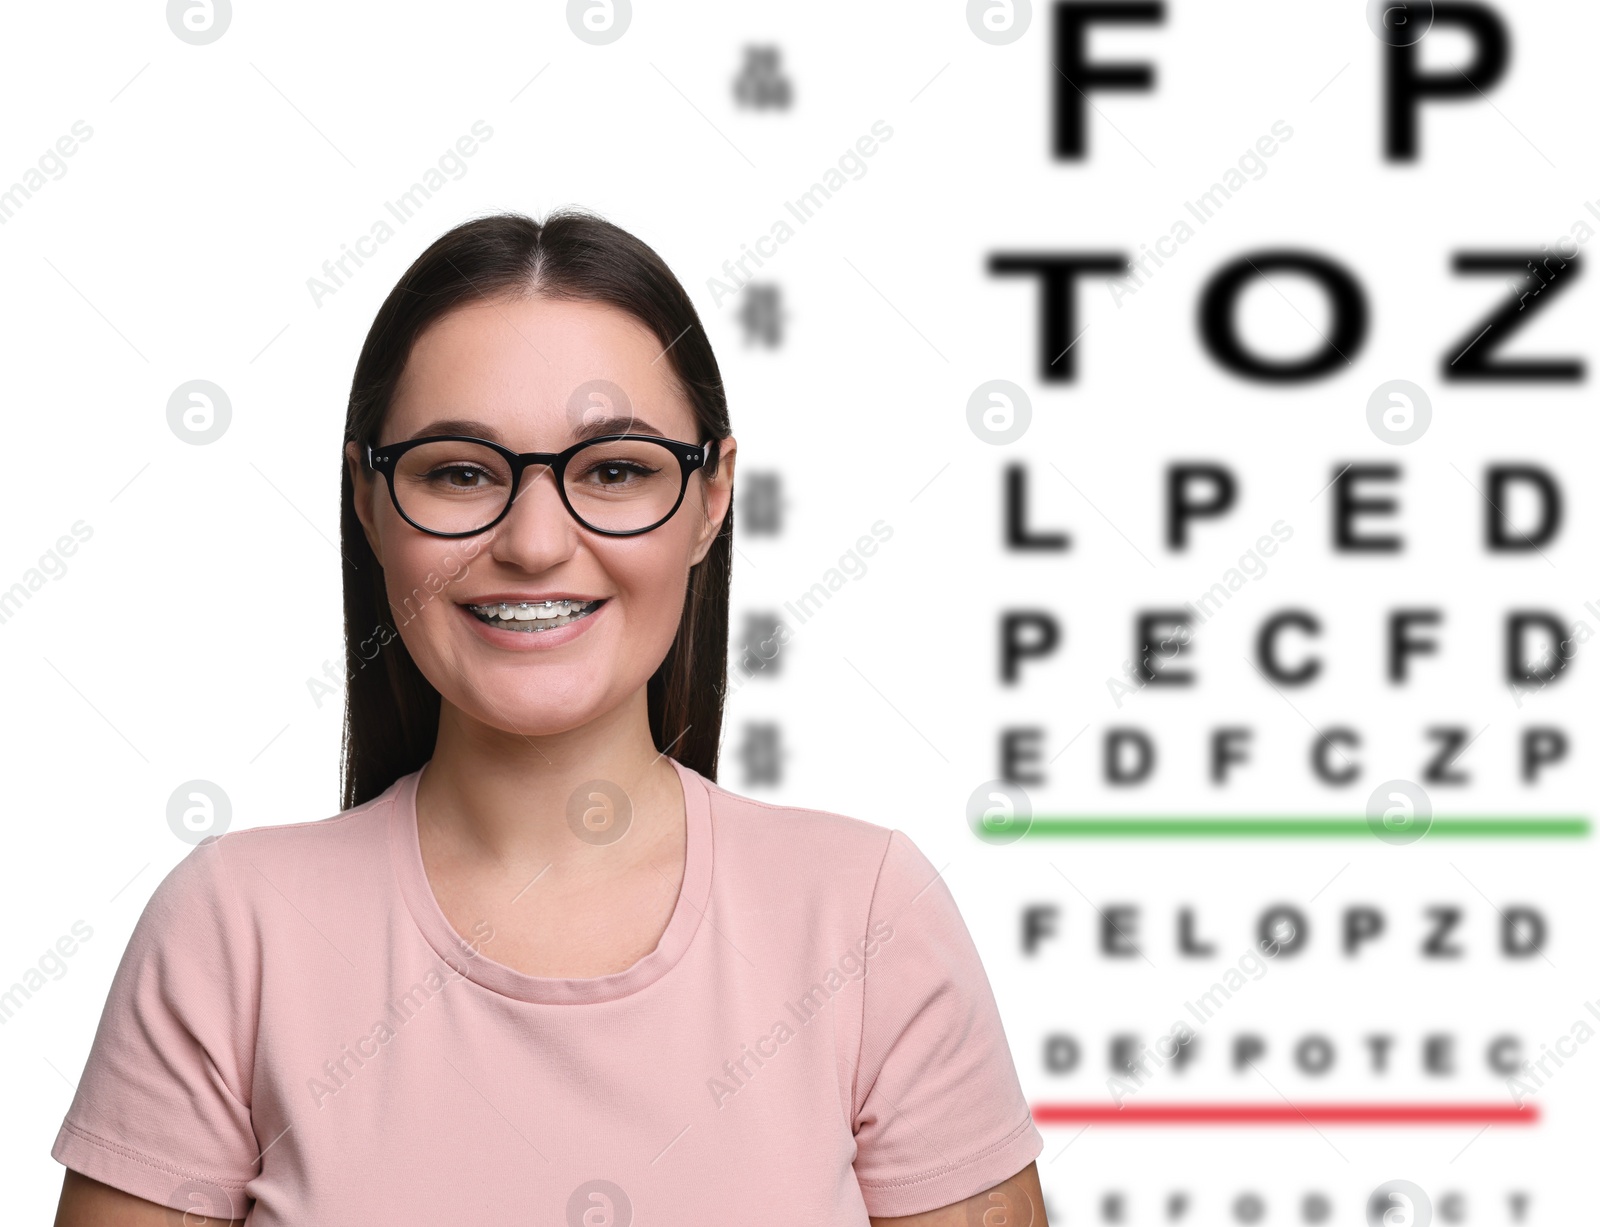 Image of Vision test. Young woman with glasses and eye chart on white background